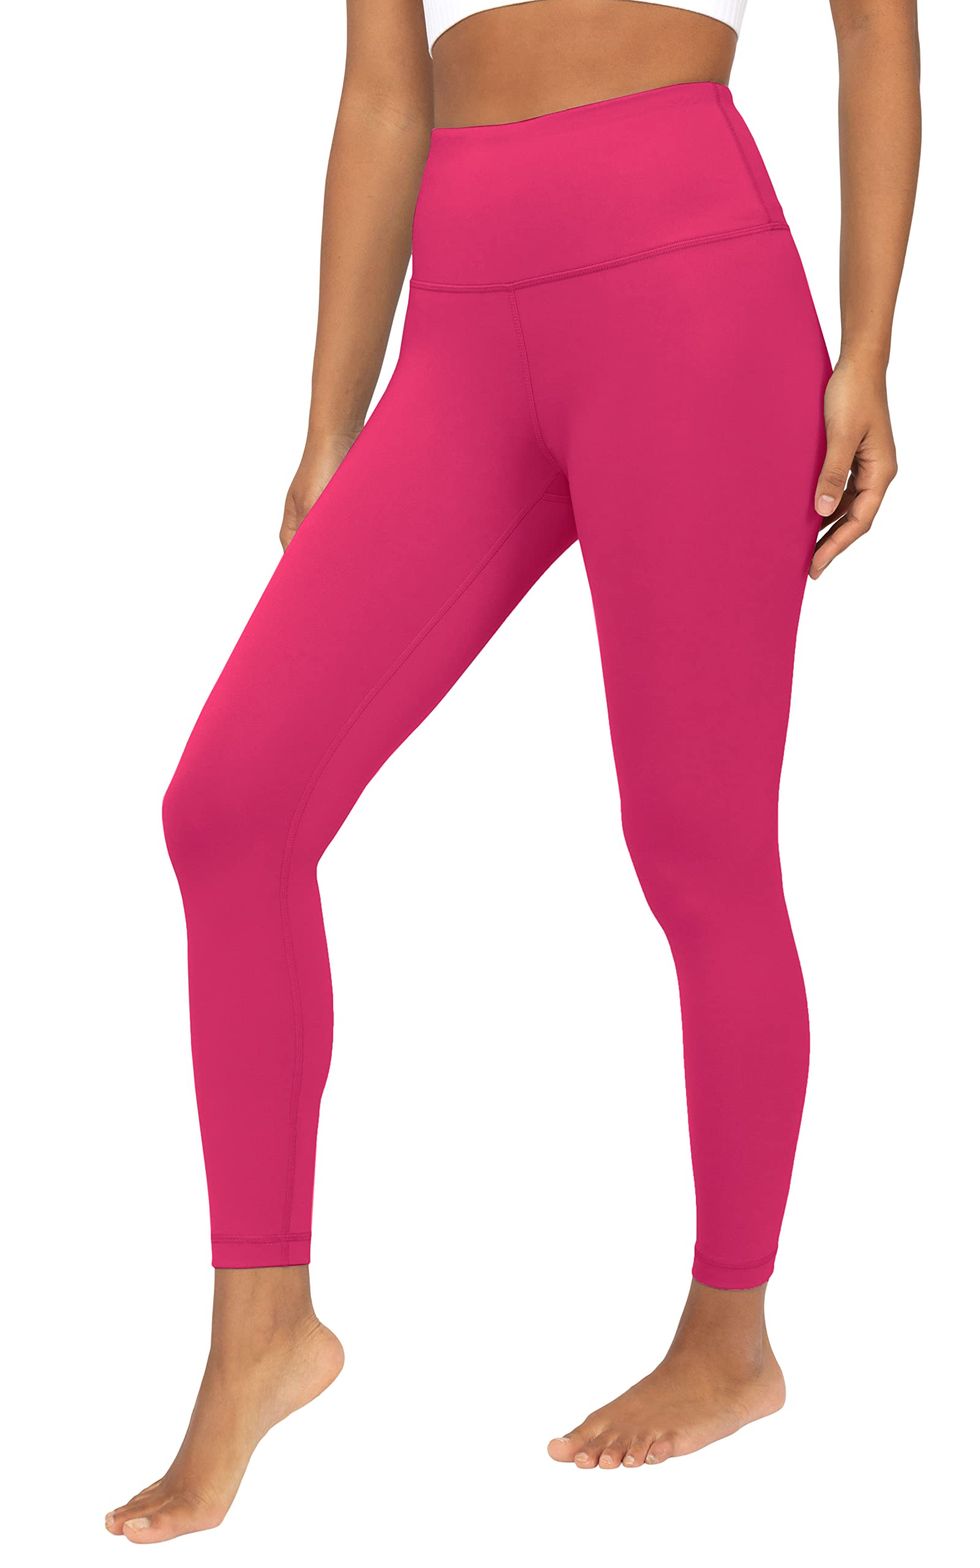 Yogalicious High Waist Ultra Soft Ankle Length Leggings with